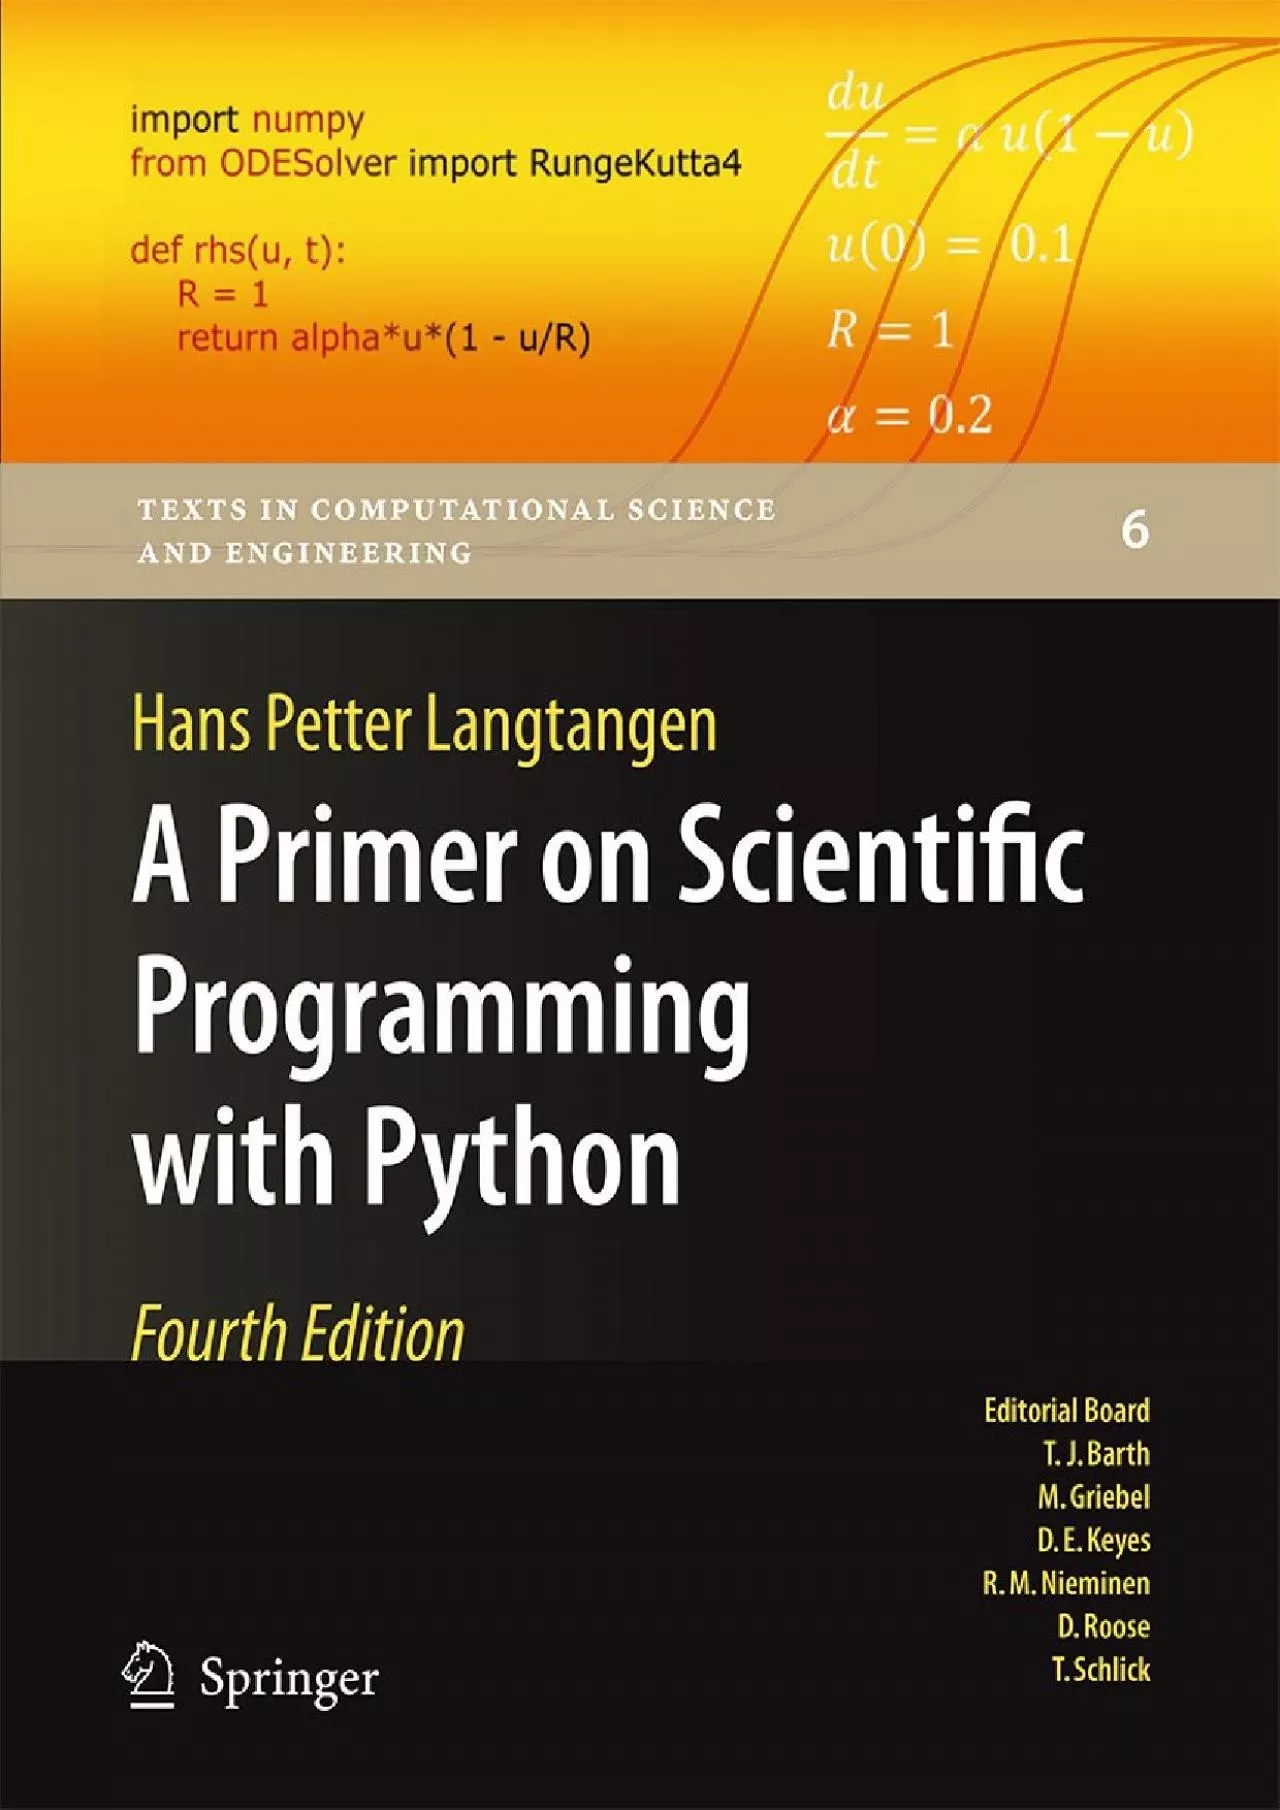 [BEST]-A Primer on Scientific Programming with Python (Texts in Computational Science